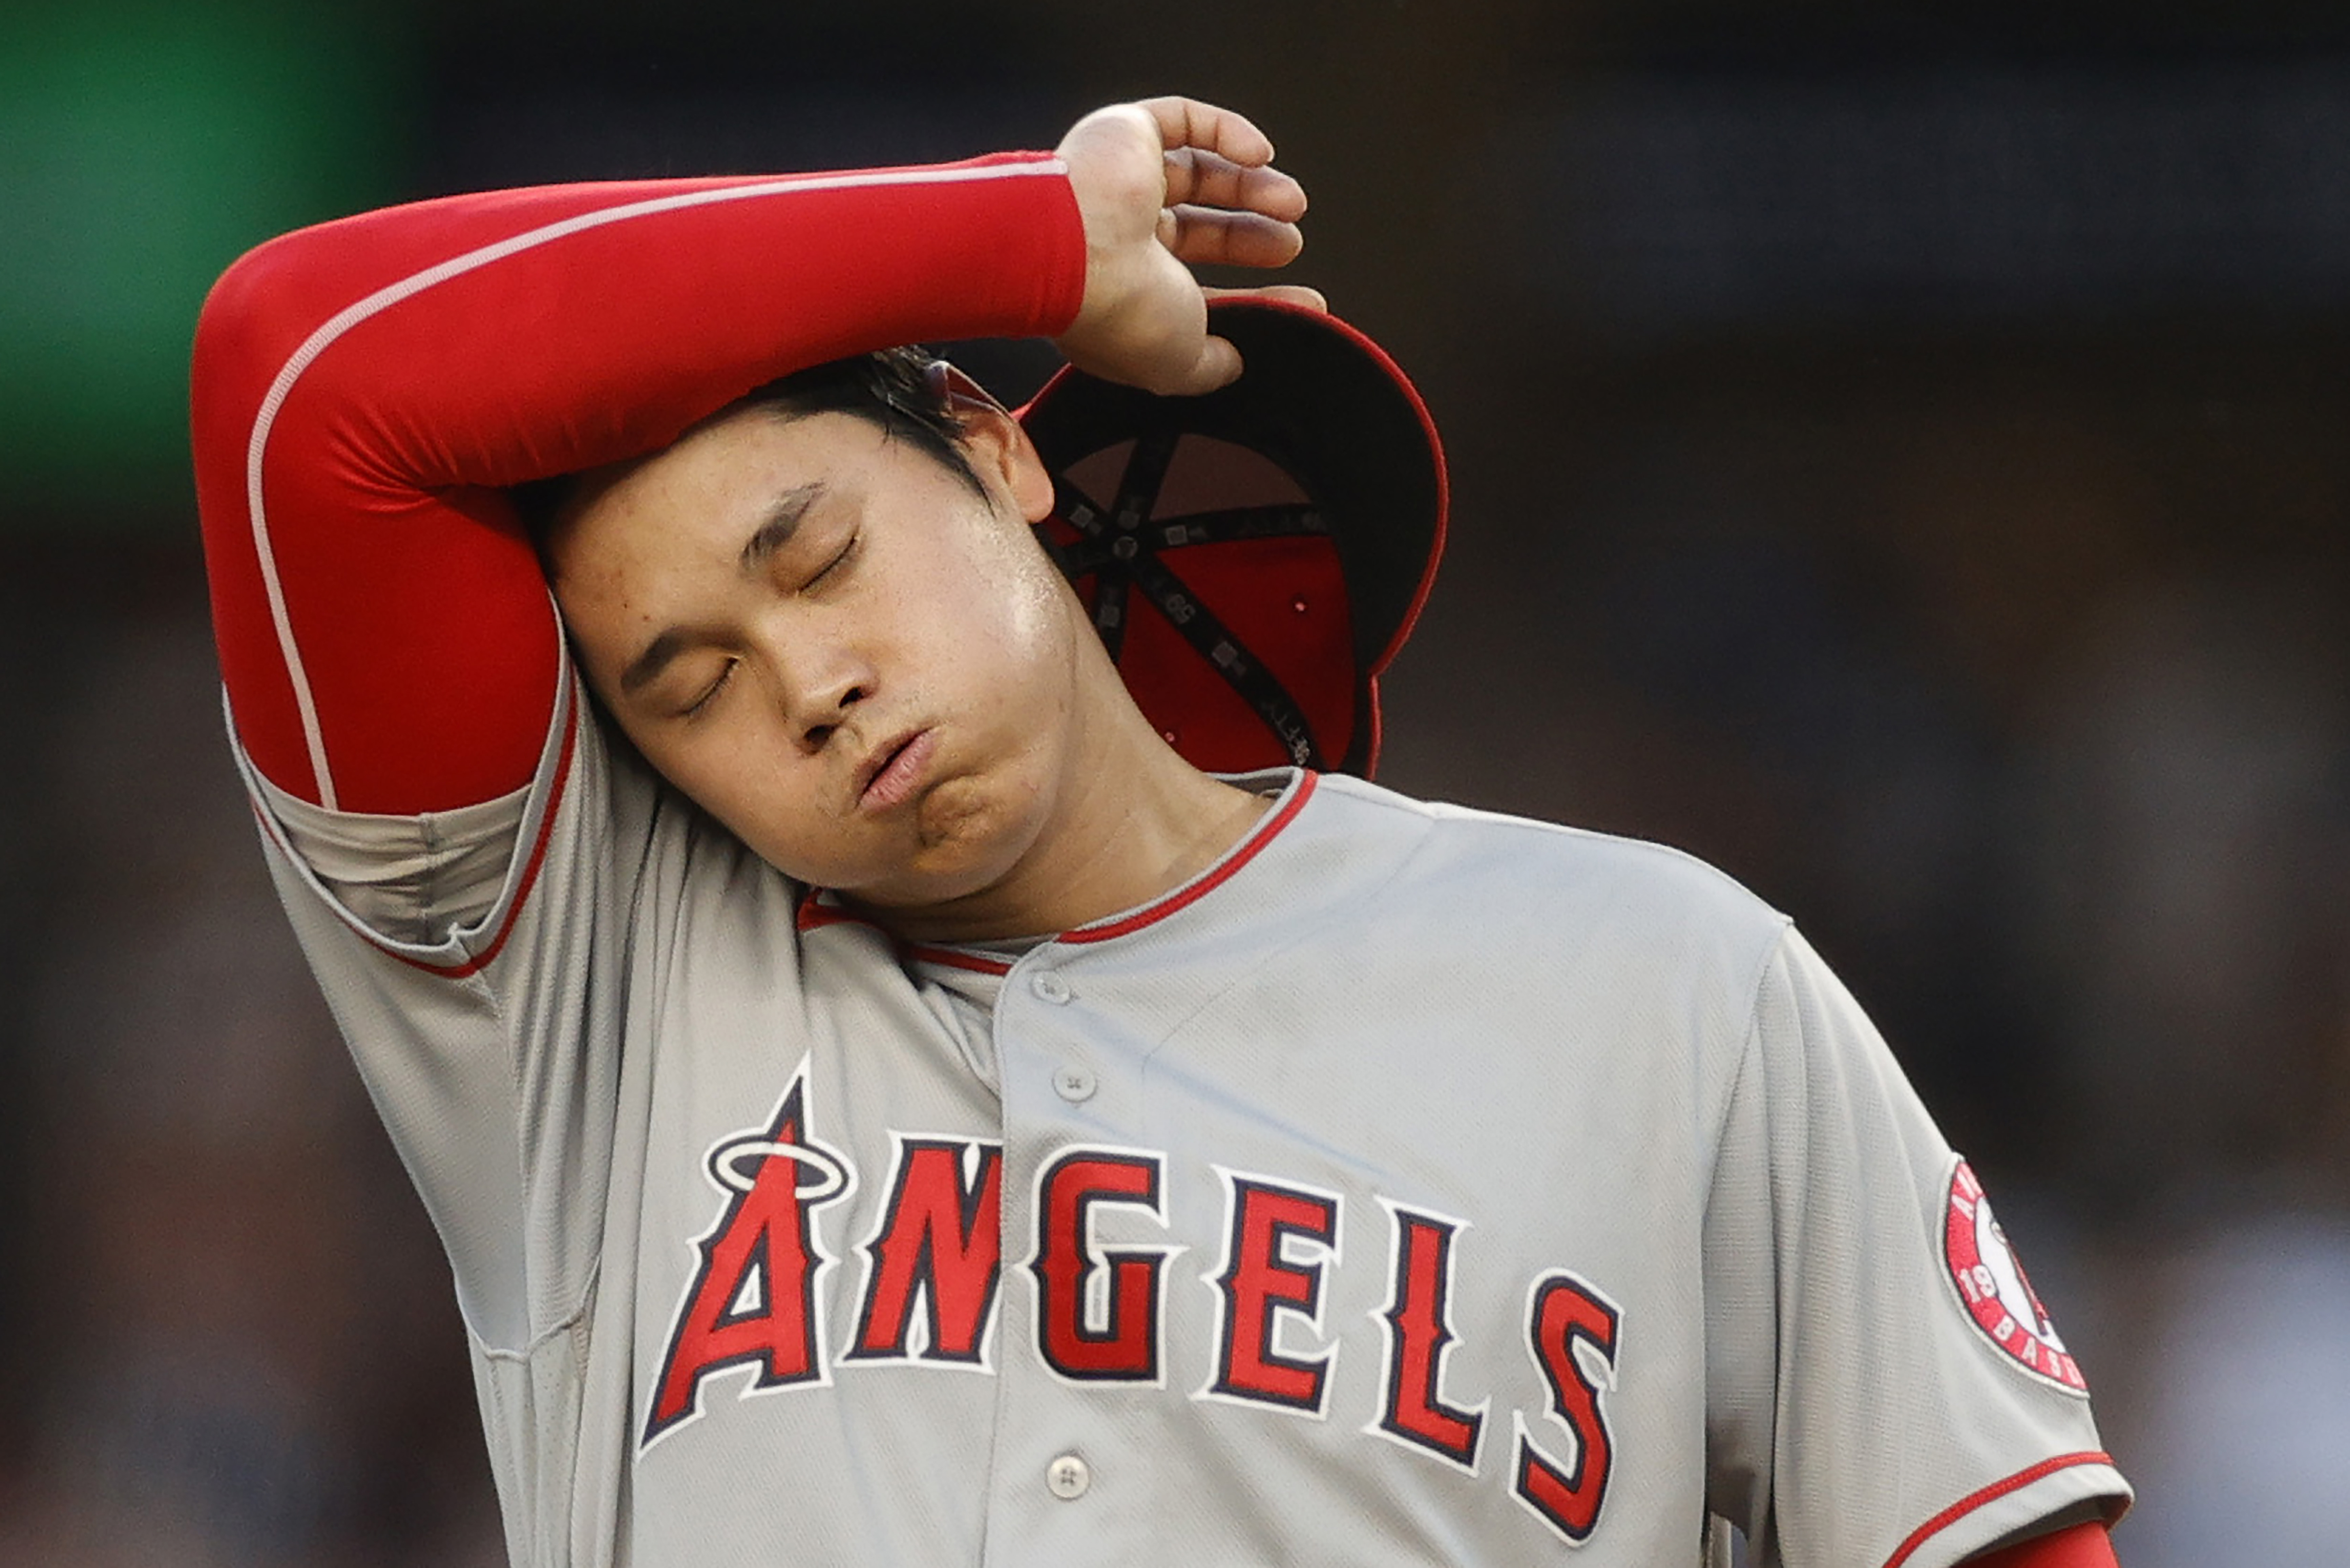 Welcome to Shohei Ohtani's All-Star Game